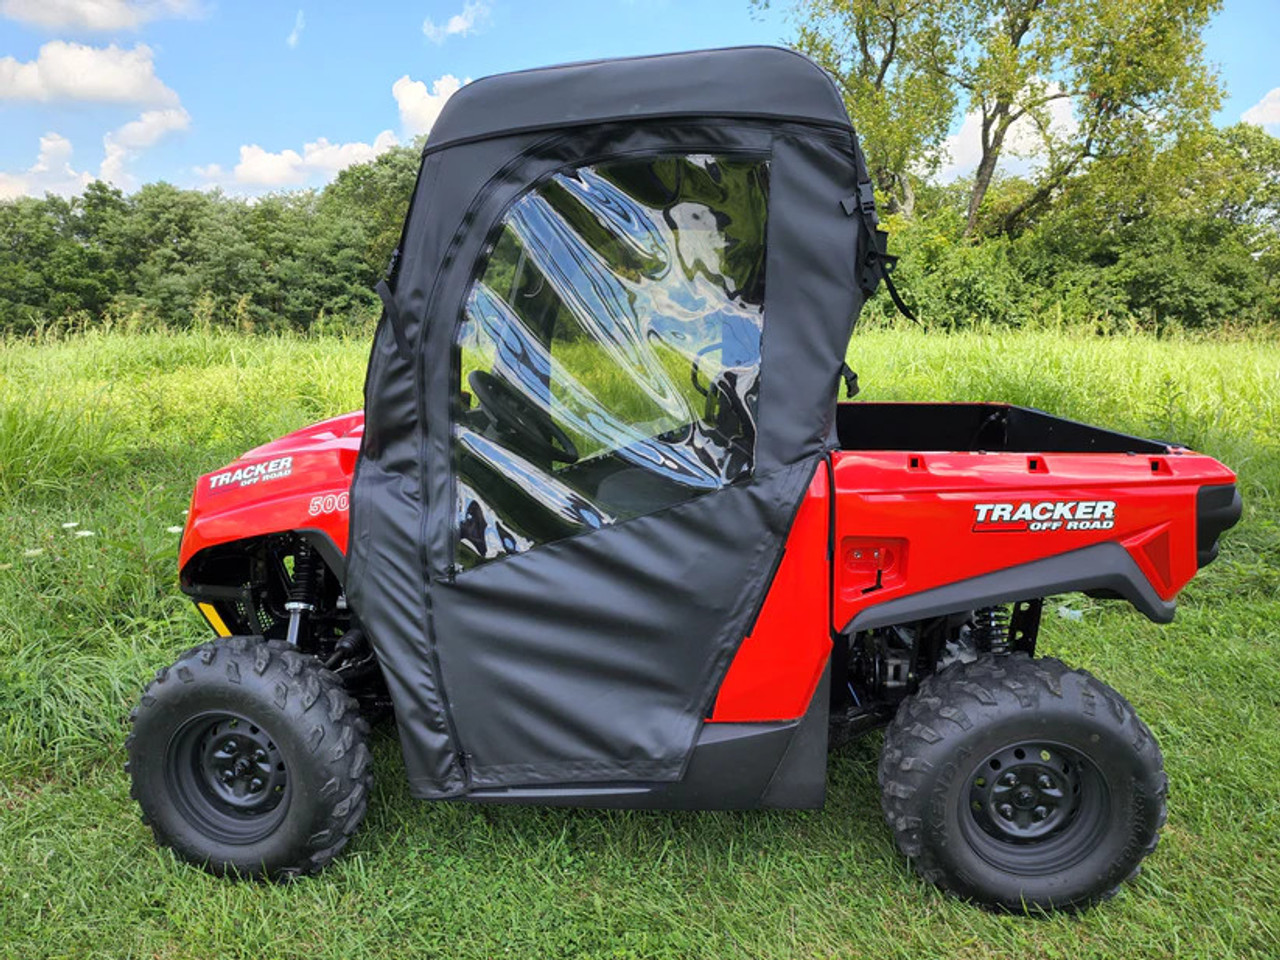 3 Star side x side Arctic Cat Prowler Tracker Off Road 500S full cab enclosure side view